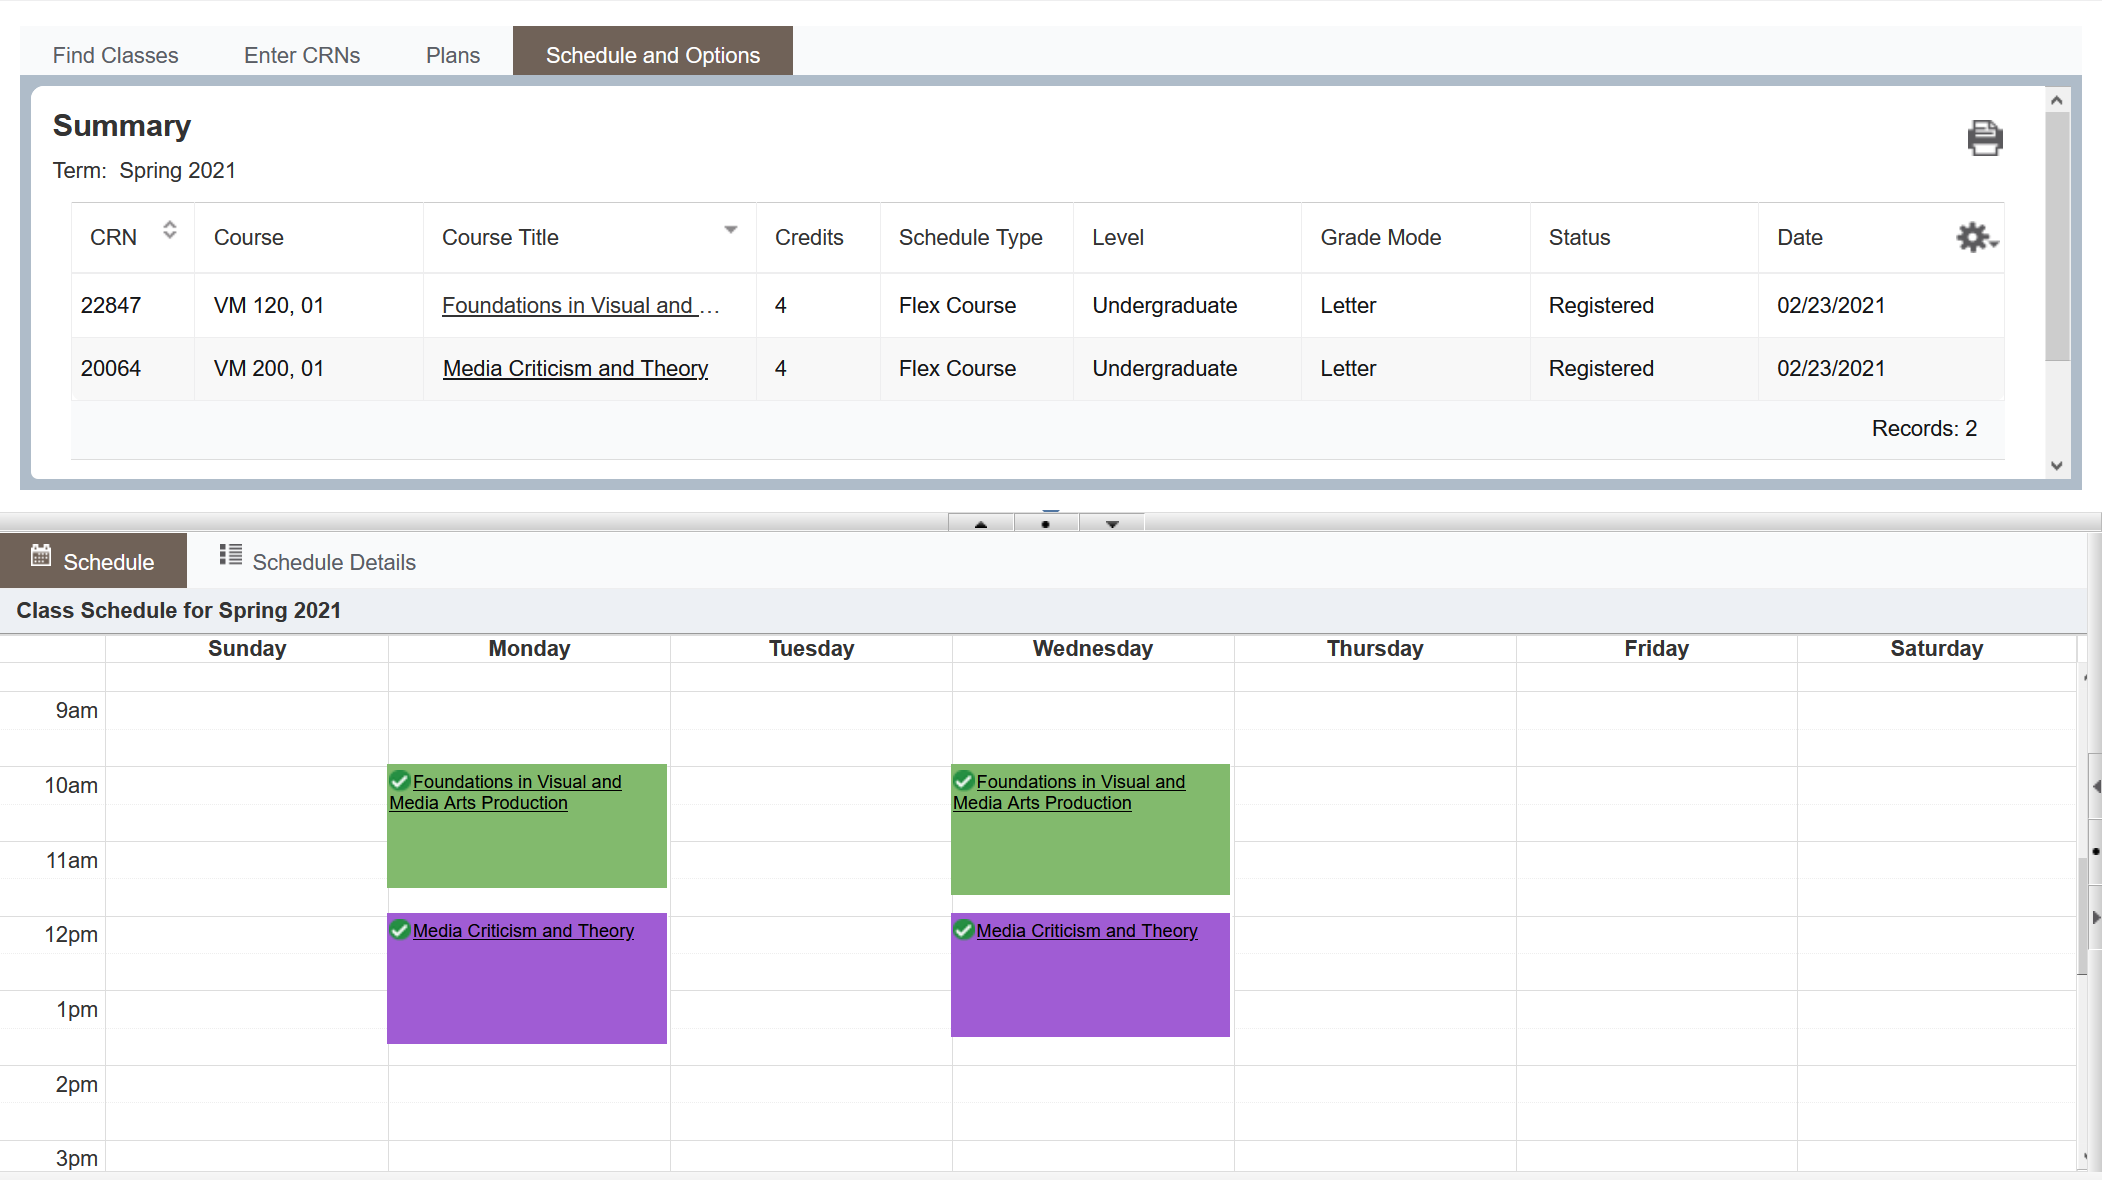 Screenshot of Schedule and Options page